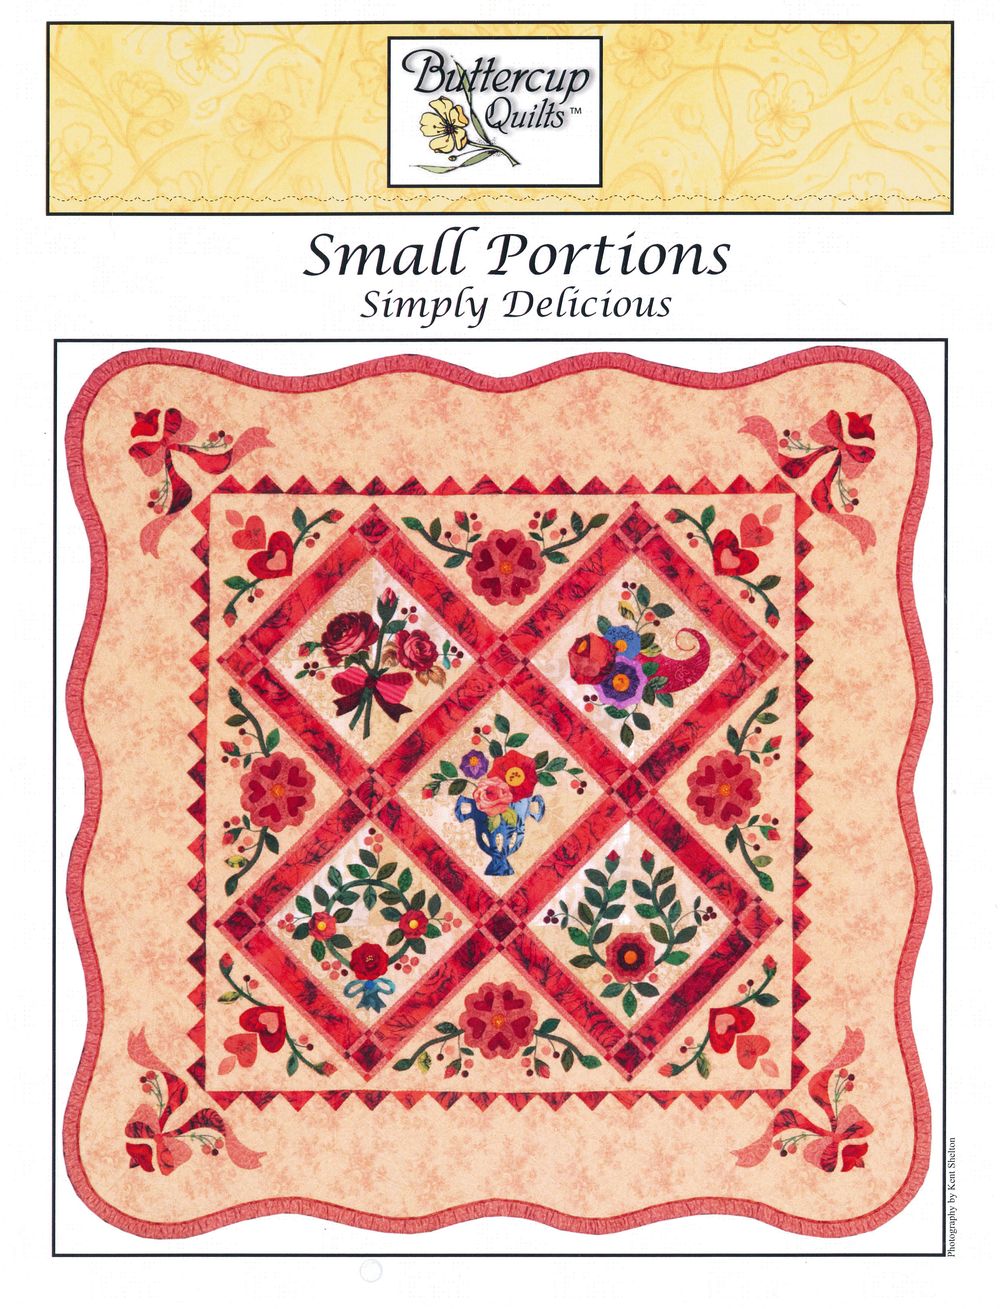 Small Portions: Simply Delicious Quilt Pattern Book by Cody Mazuran for Buttercup Quilts